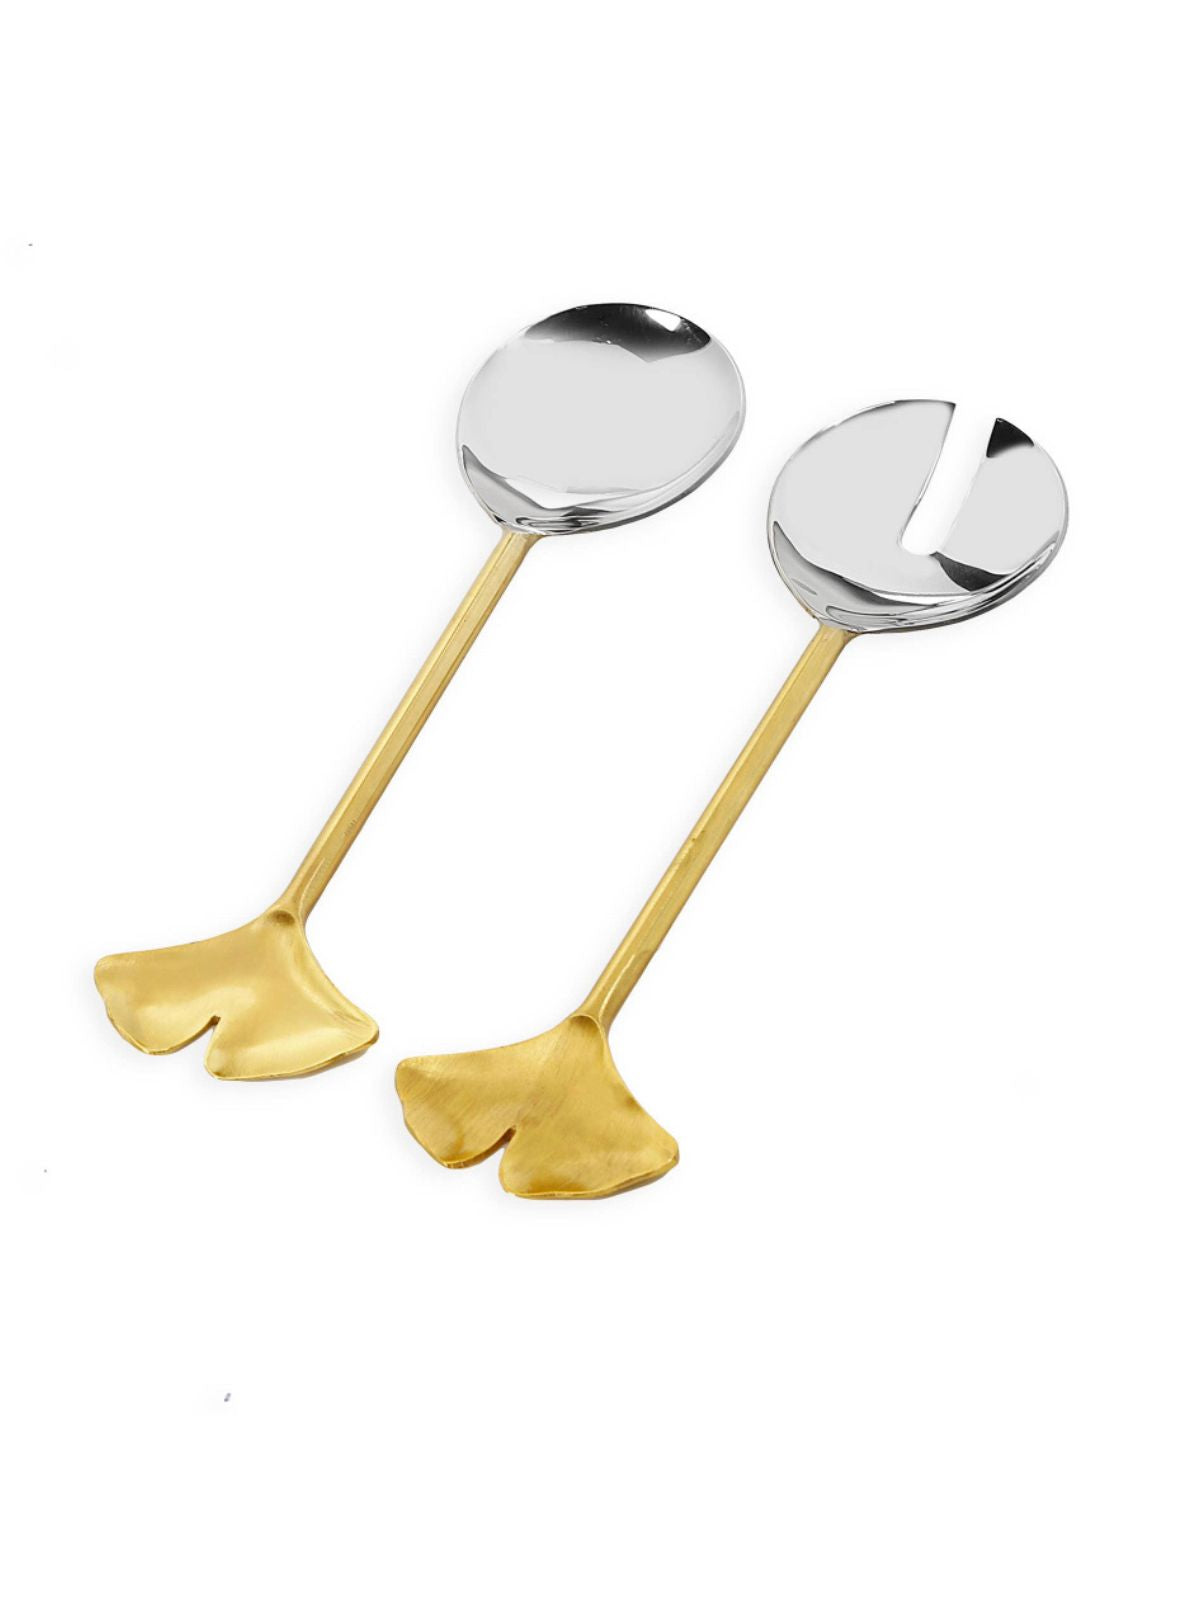 Add beauty to your serving decor with this hand-crafted stainless steel salad server set featuring gold floral handles that coordinates perfectly with its silver base. Available at KYA Home Decor 